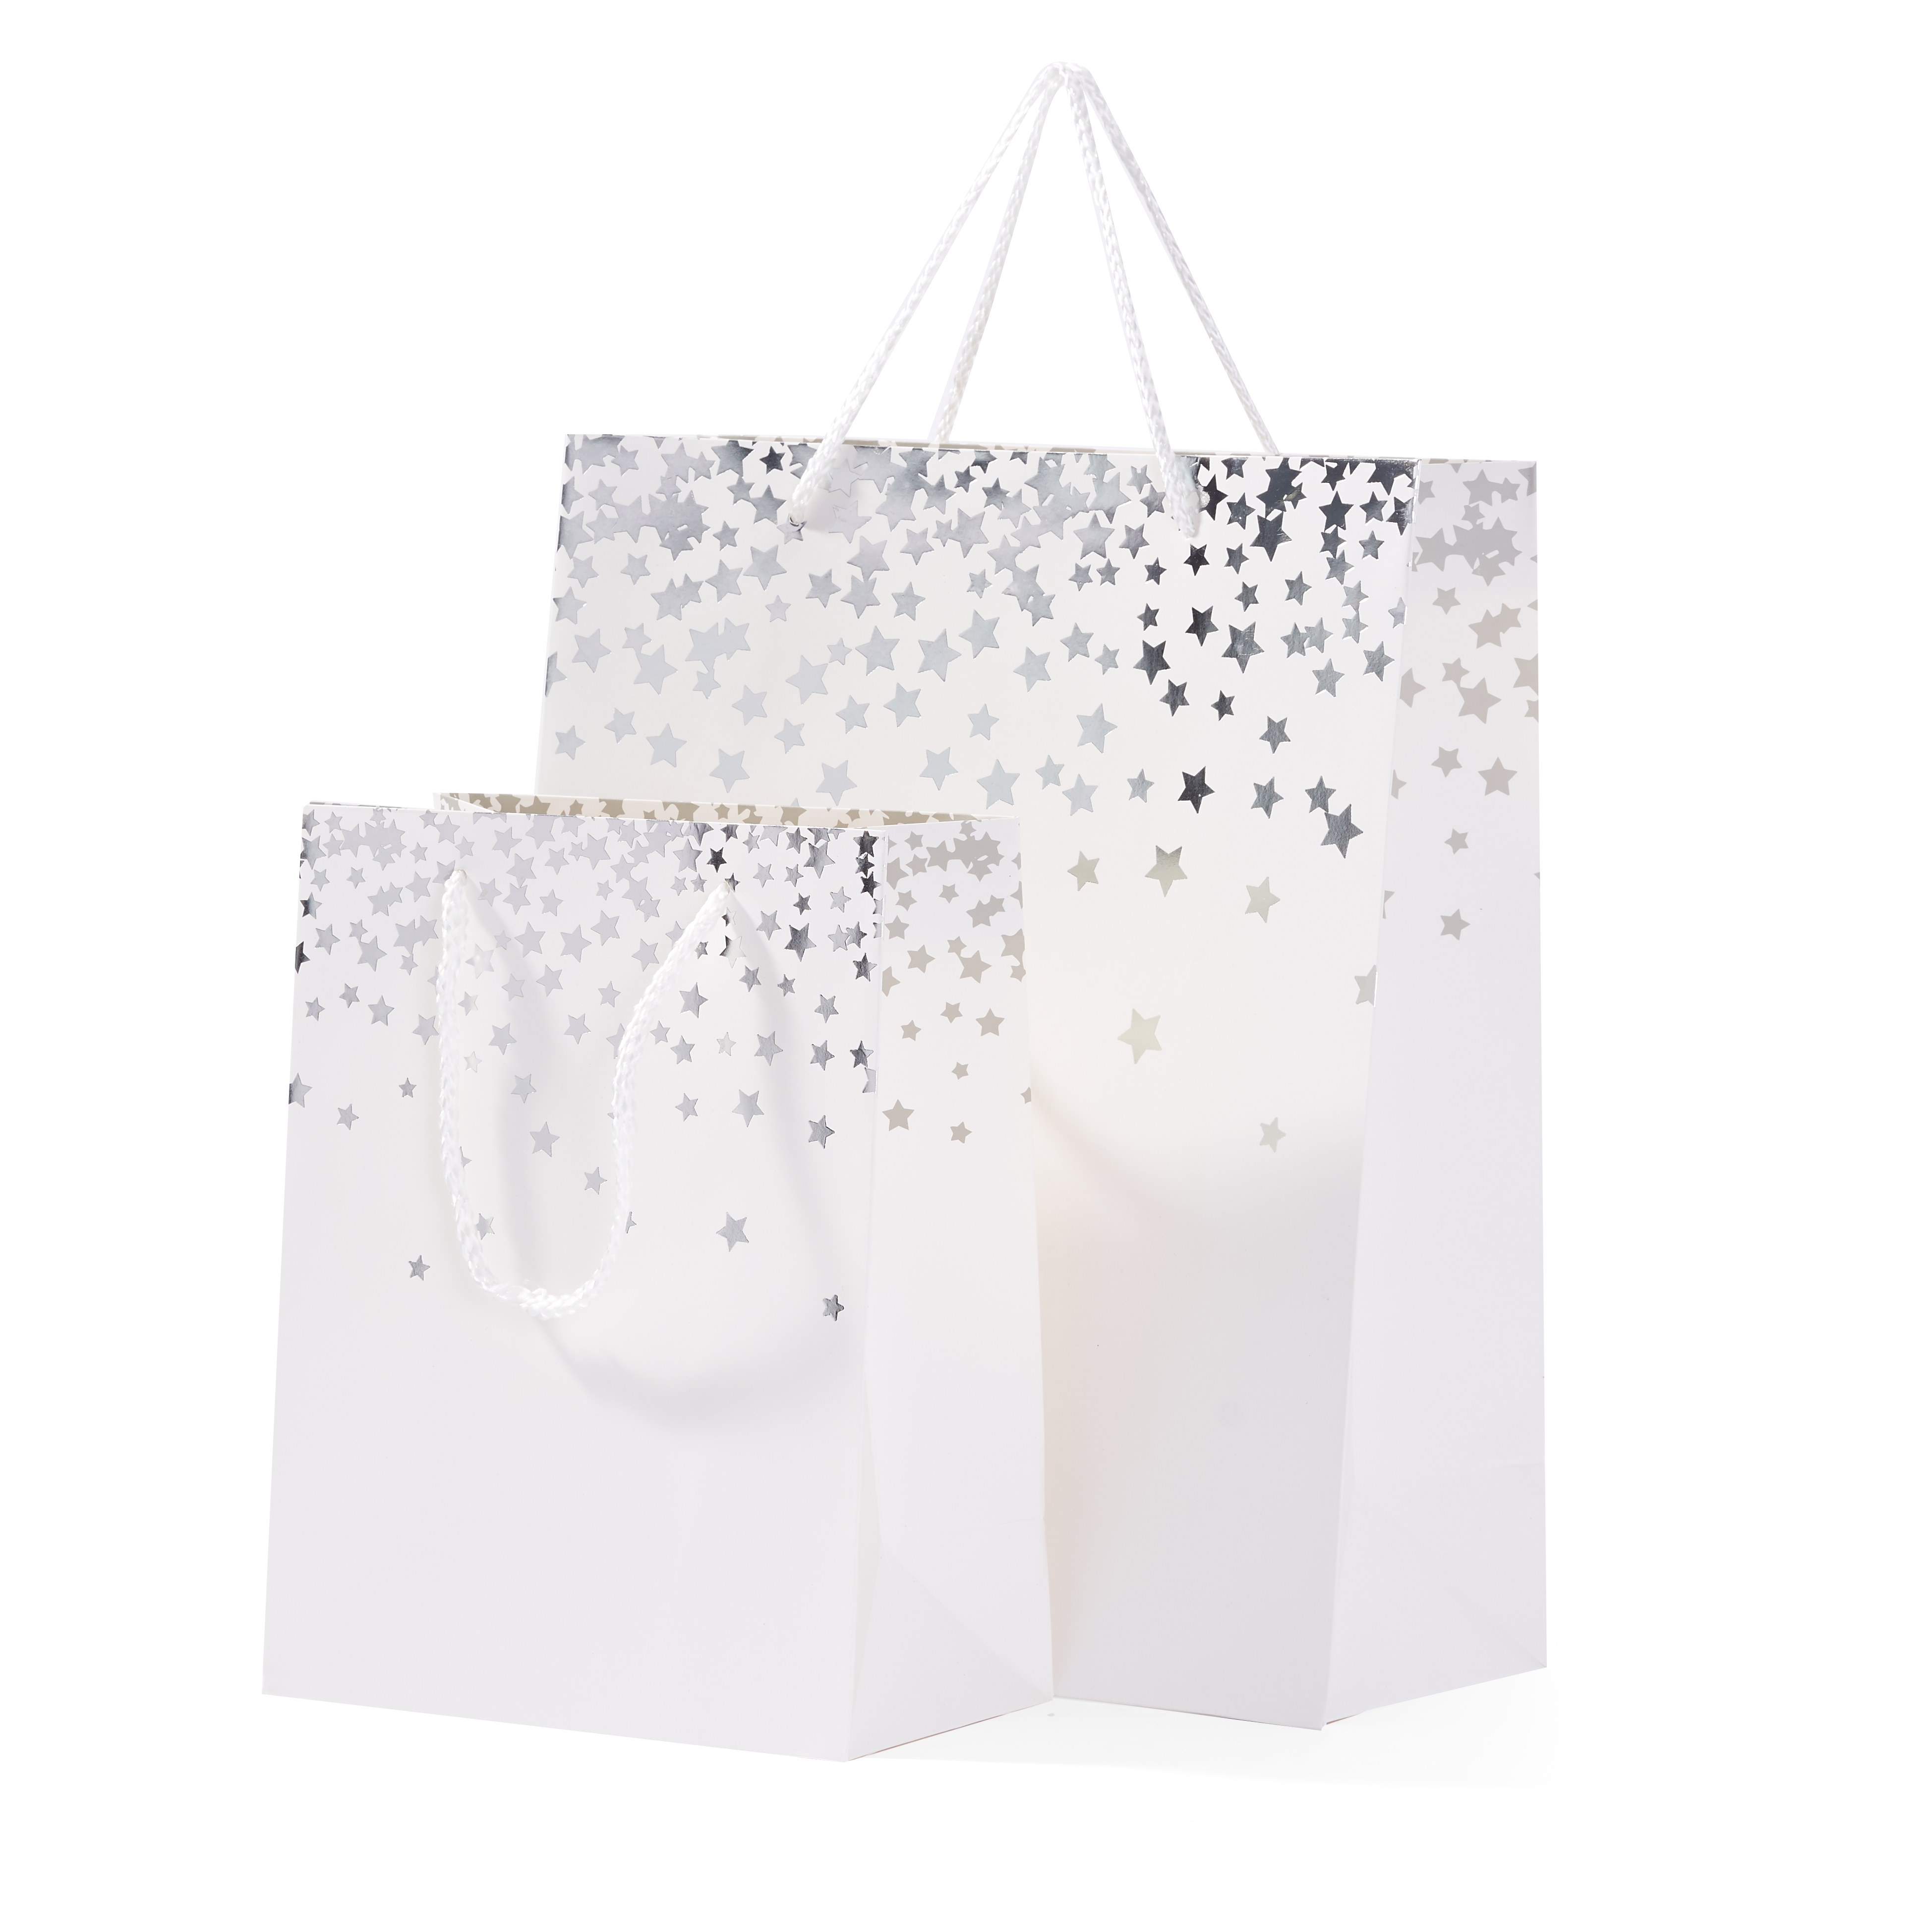 16 Coloured Gift Bags (2 Sizes)